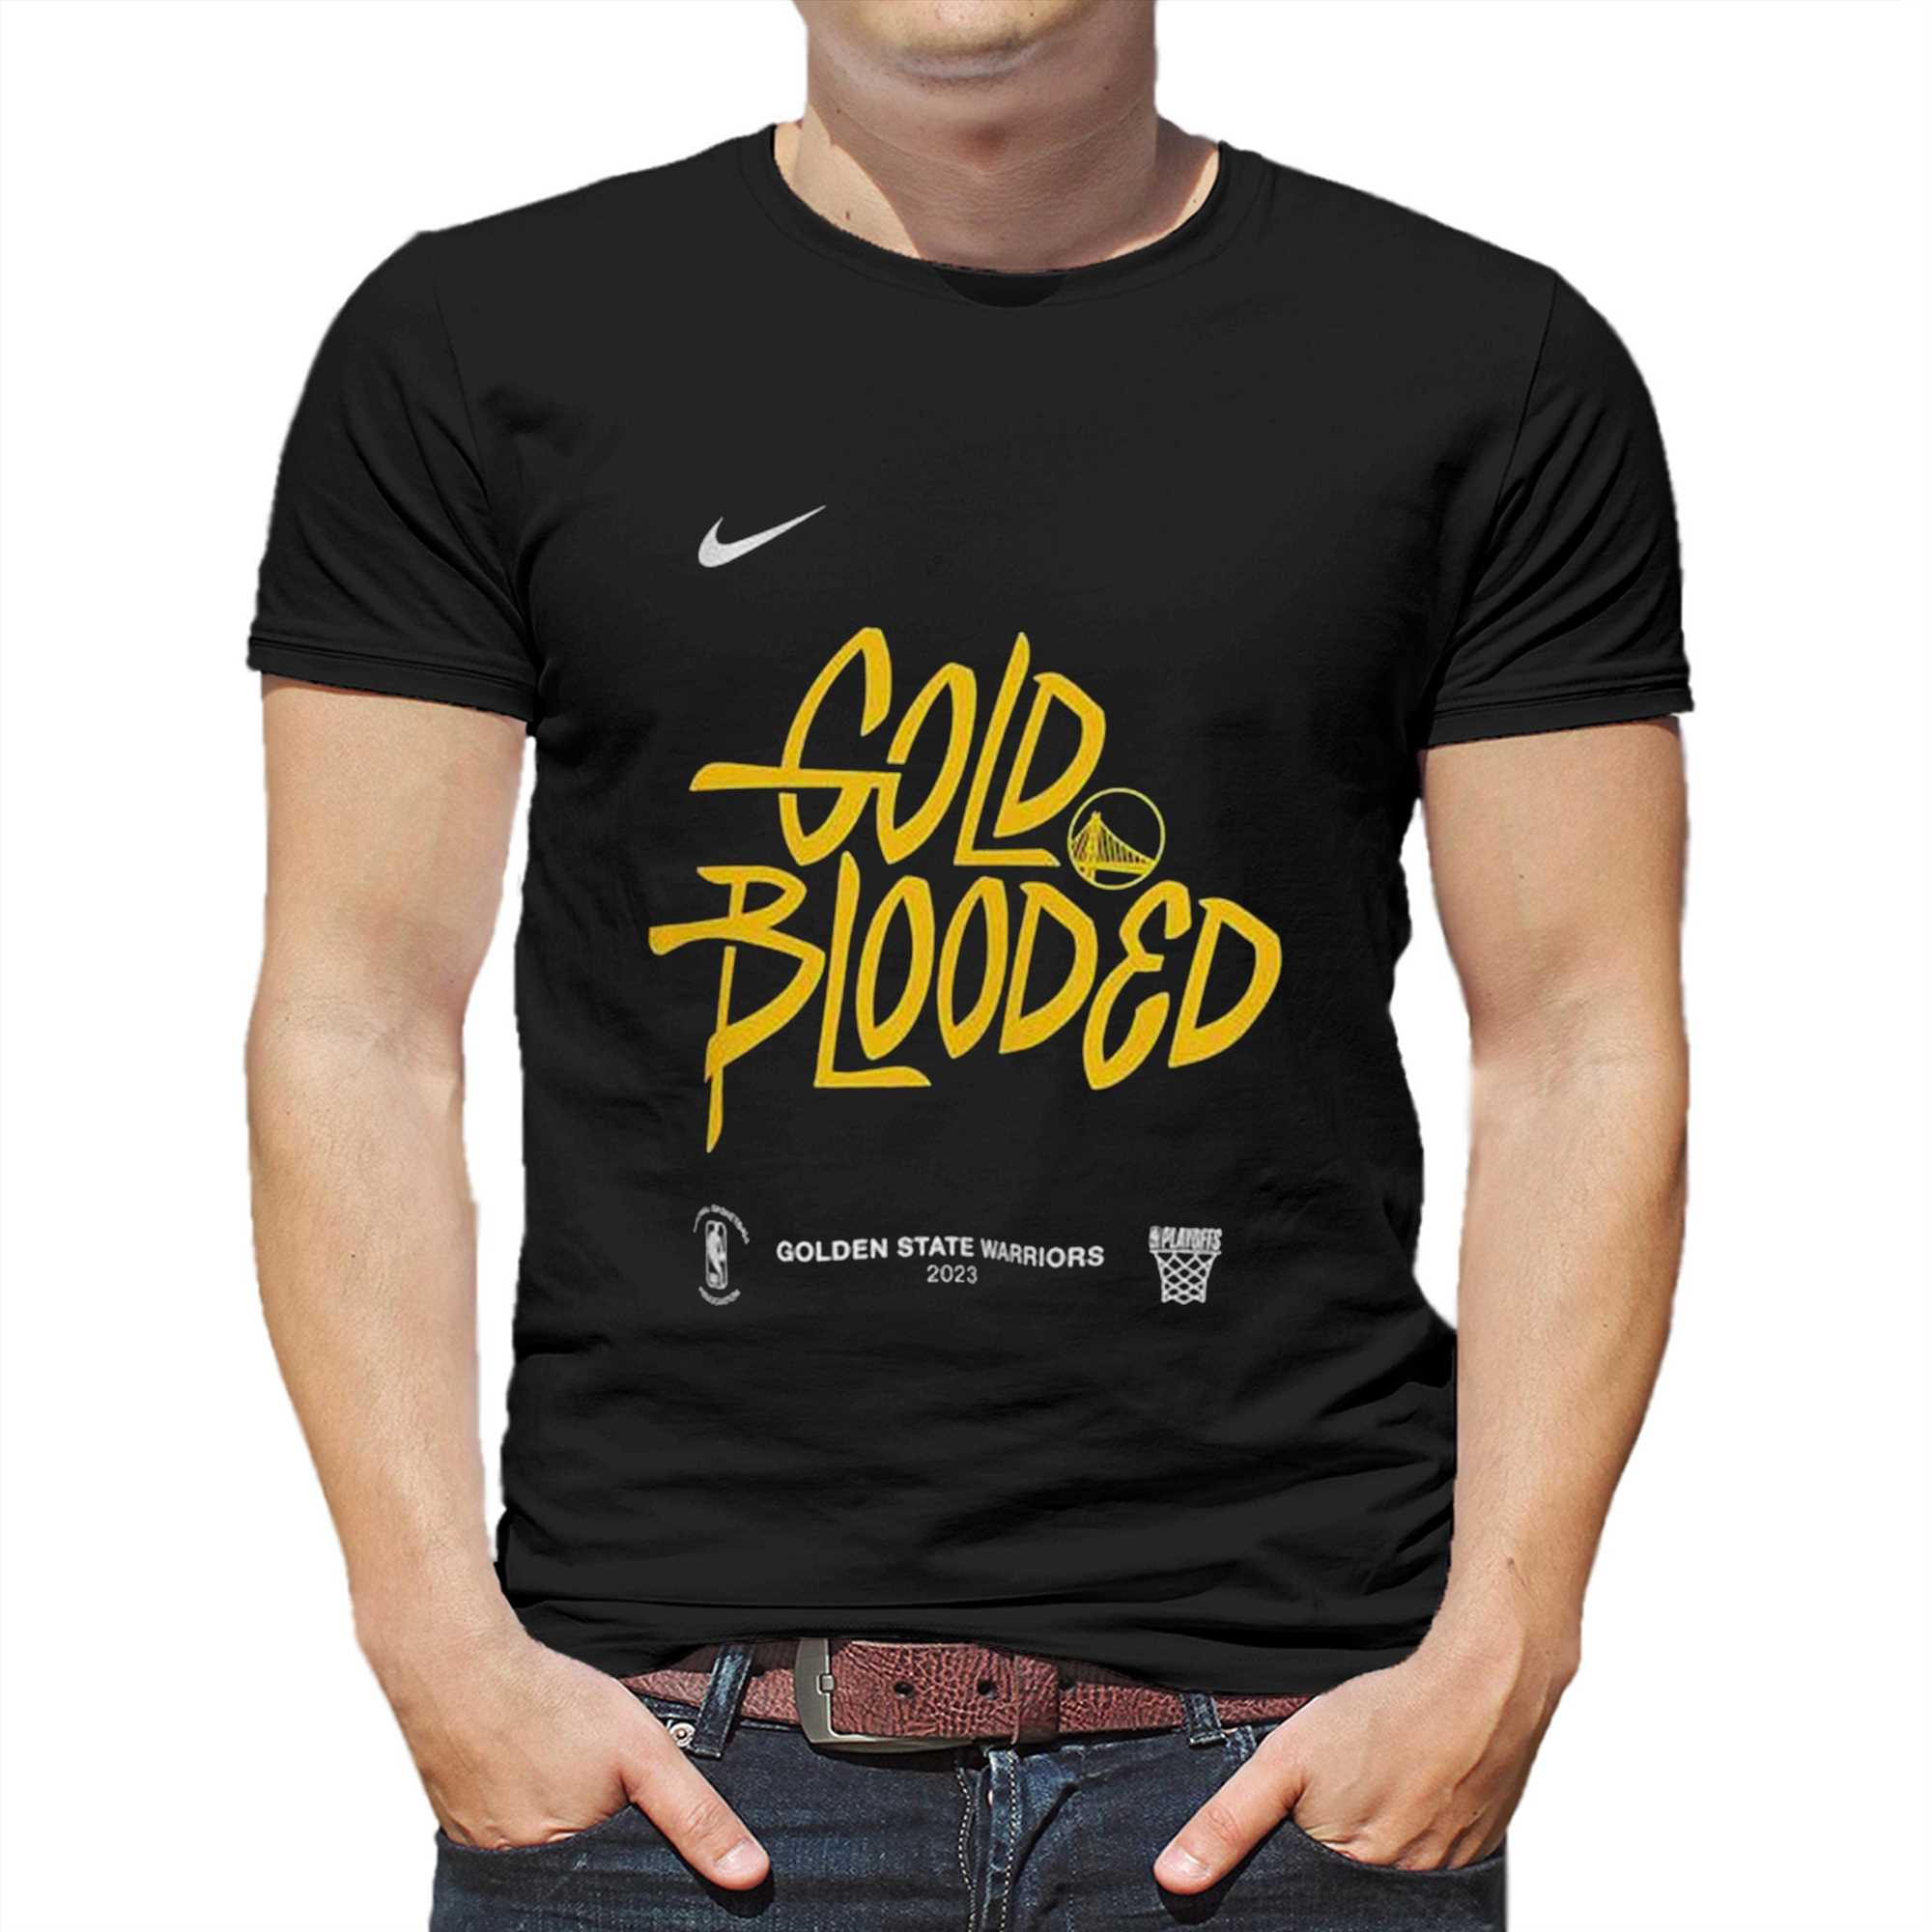 gold blooded warriors shirt youth